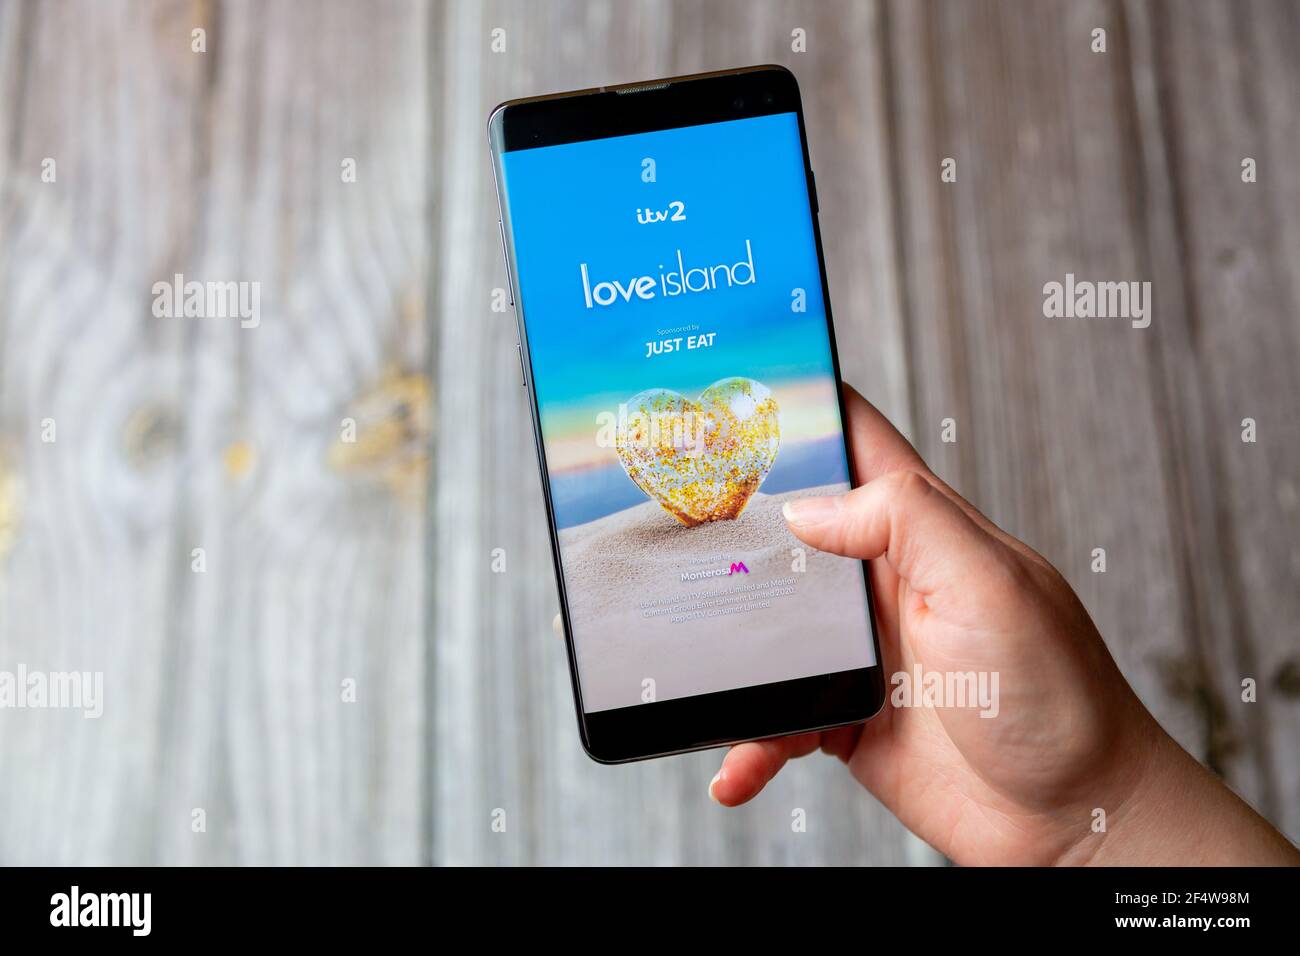 A mobile phone or cell phone being held in a hand with the Love Island app open on screen Stock Photo